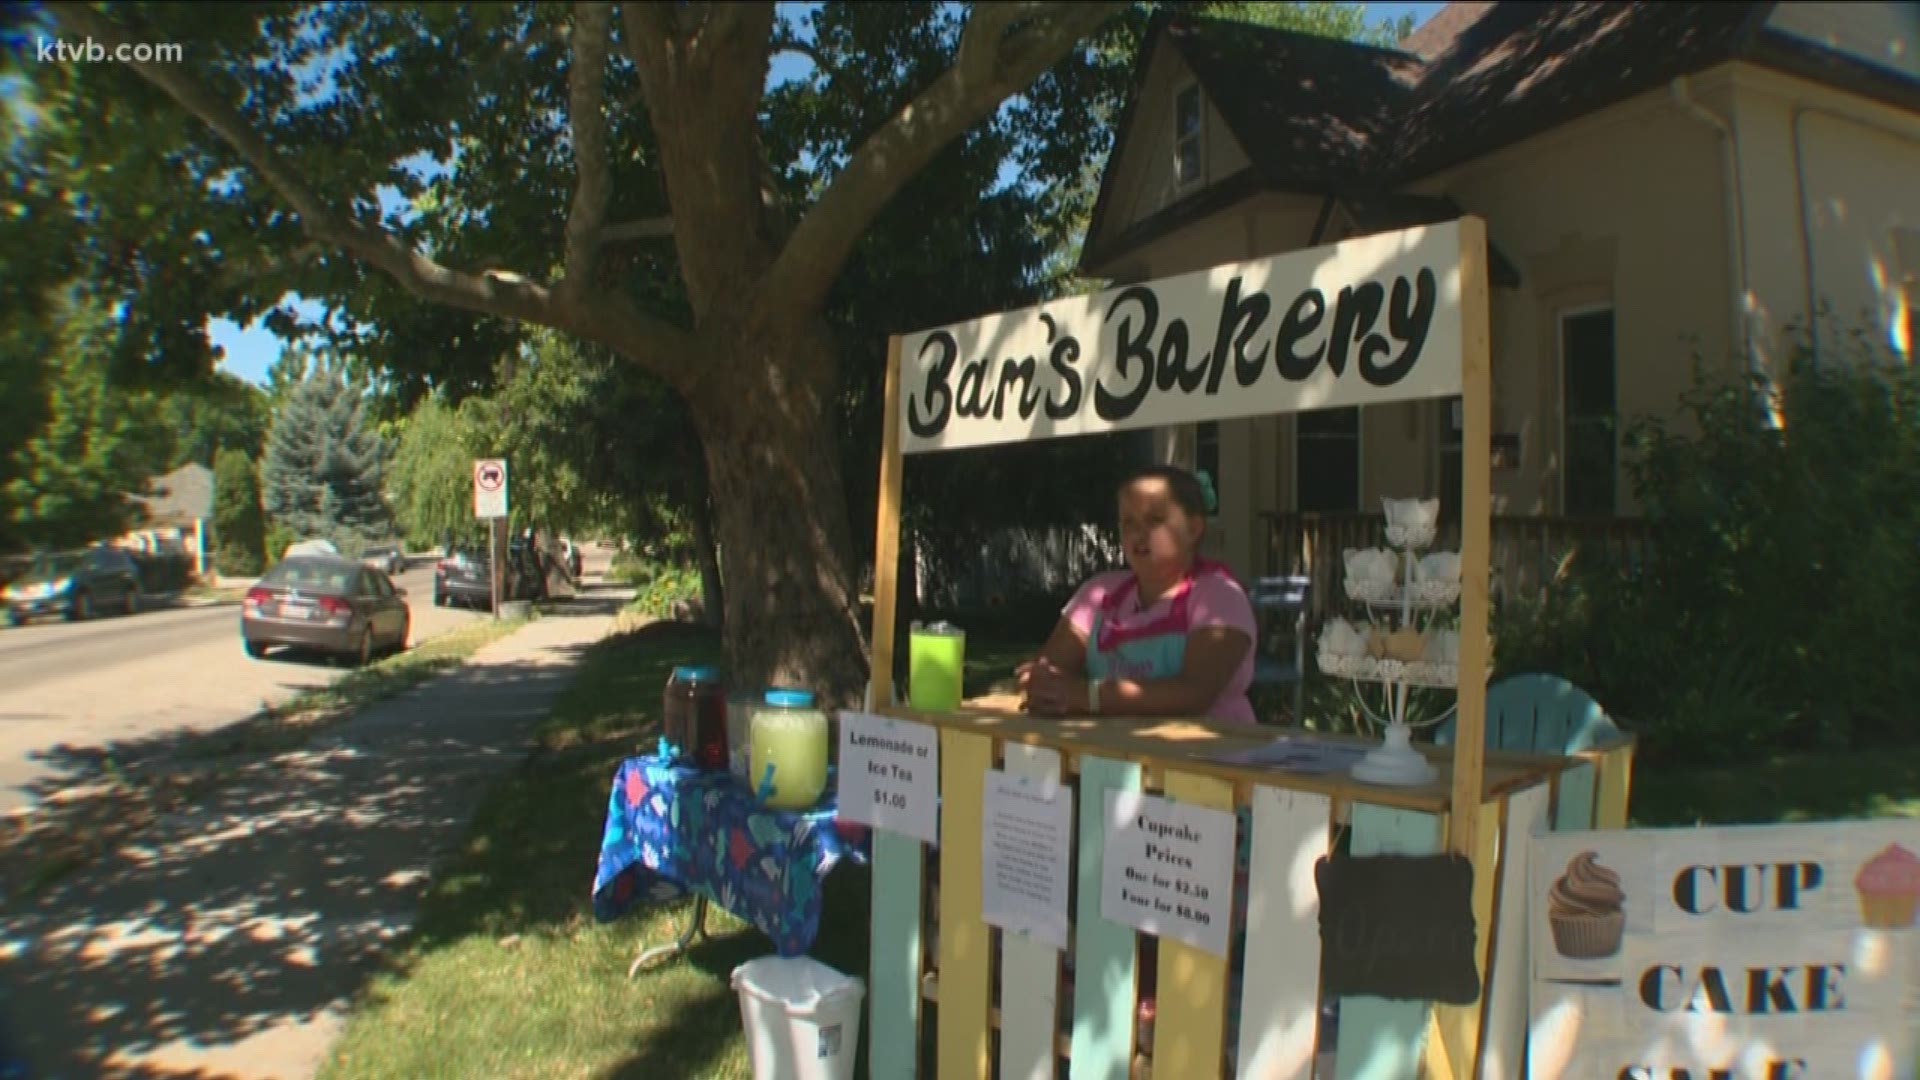 A Boise girl is dedicated to using her cupcake stand to raise money for Boise's homeless population.